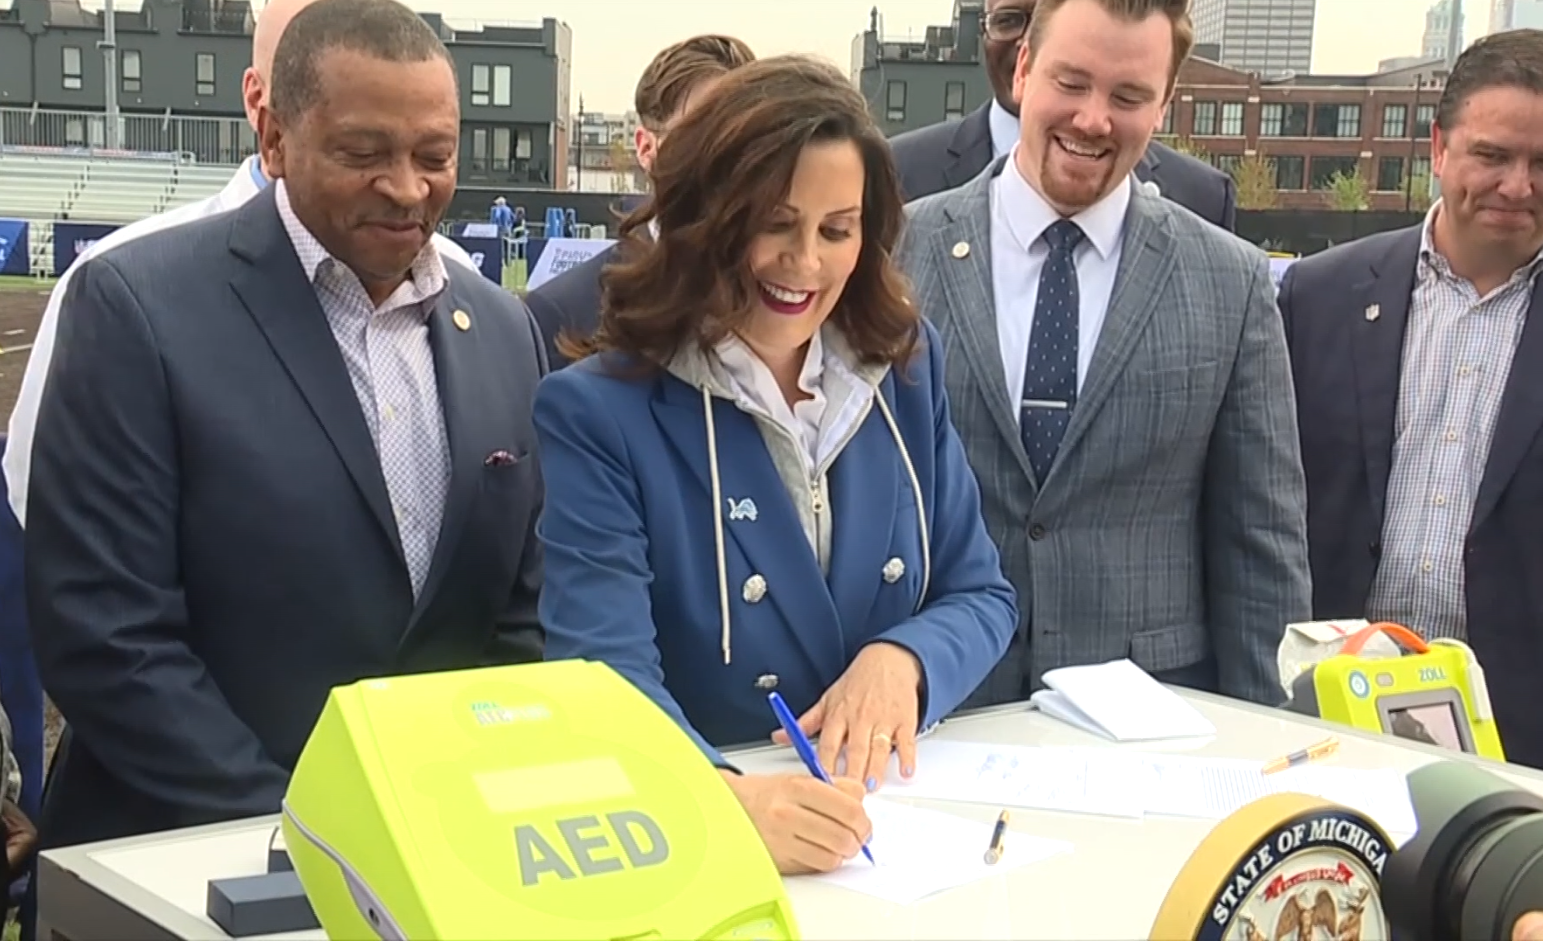 Whitmer signs bipartisan CPR and AED training bills into law